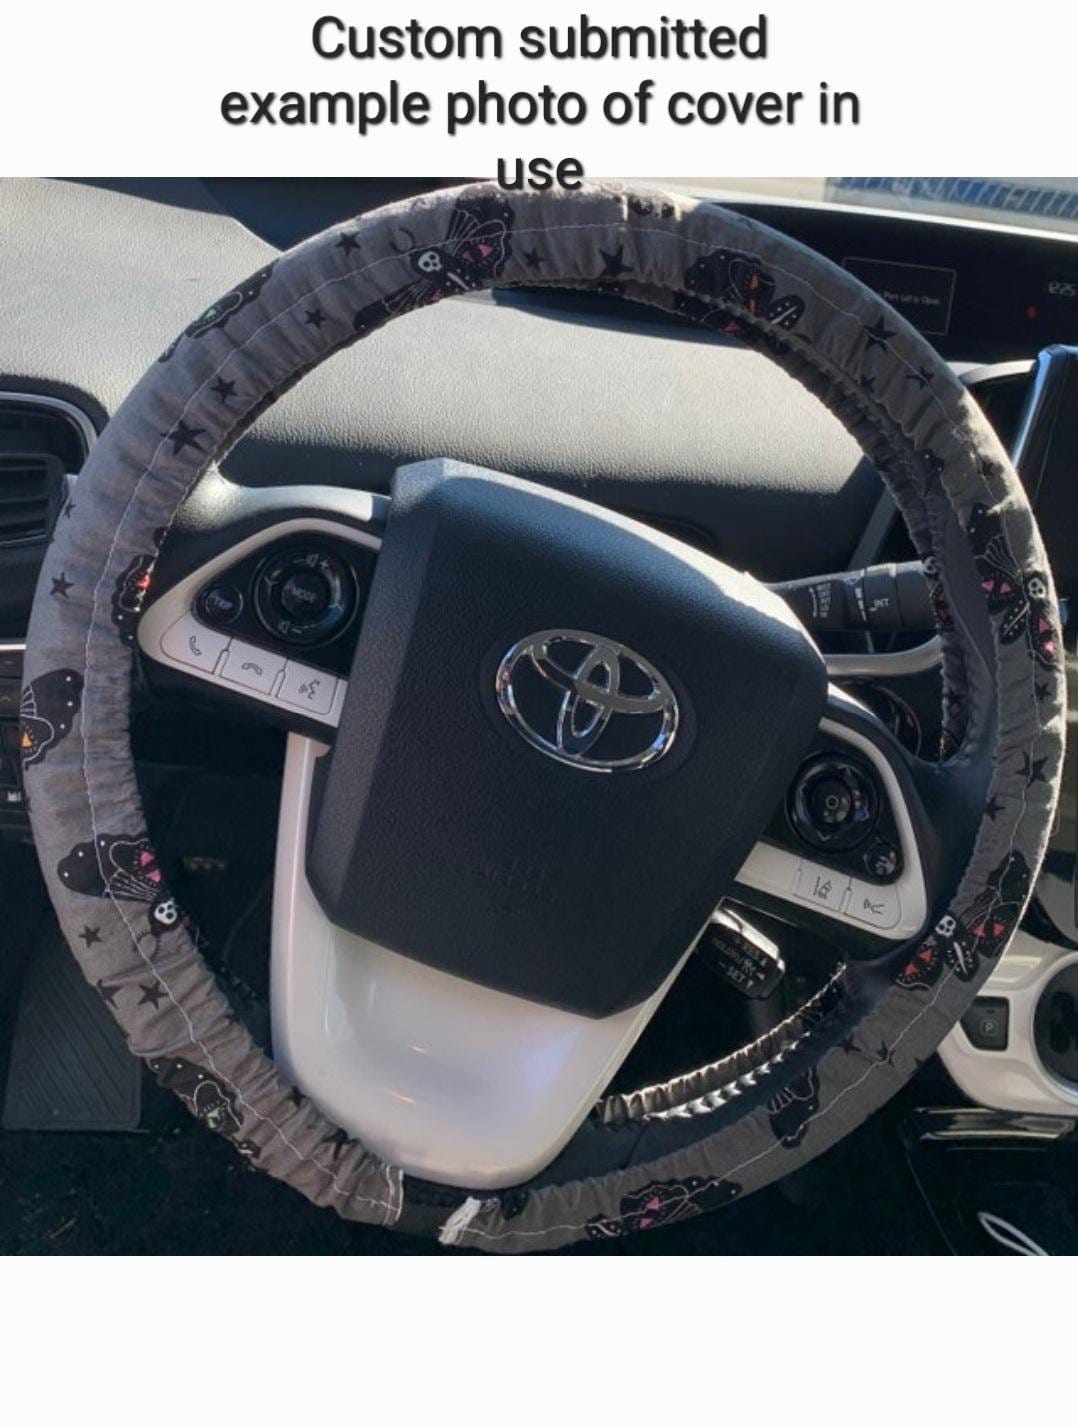 Steering Wheel Cover made with Licensed HP Fabric, Magic, Gifts for Her, 100% Cotton, Washable, Custom Car Accessories - Harlow's Store and Garden Gifts